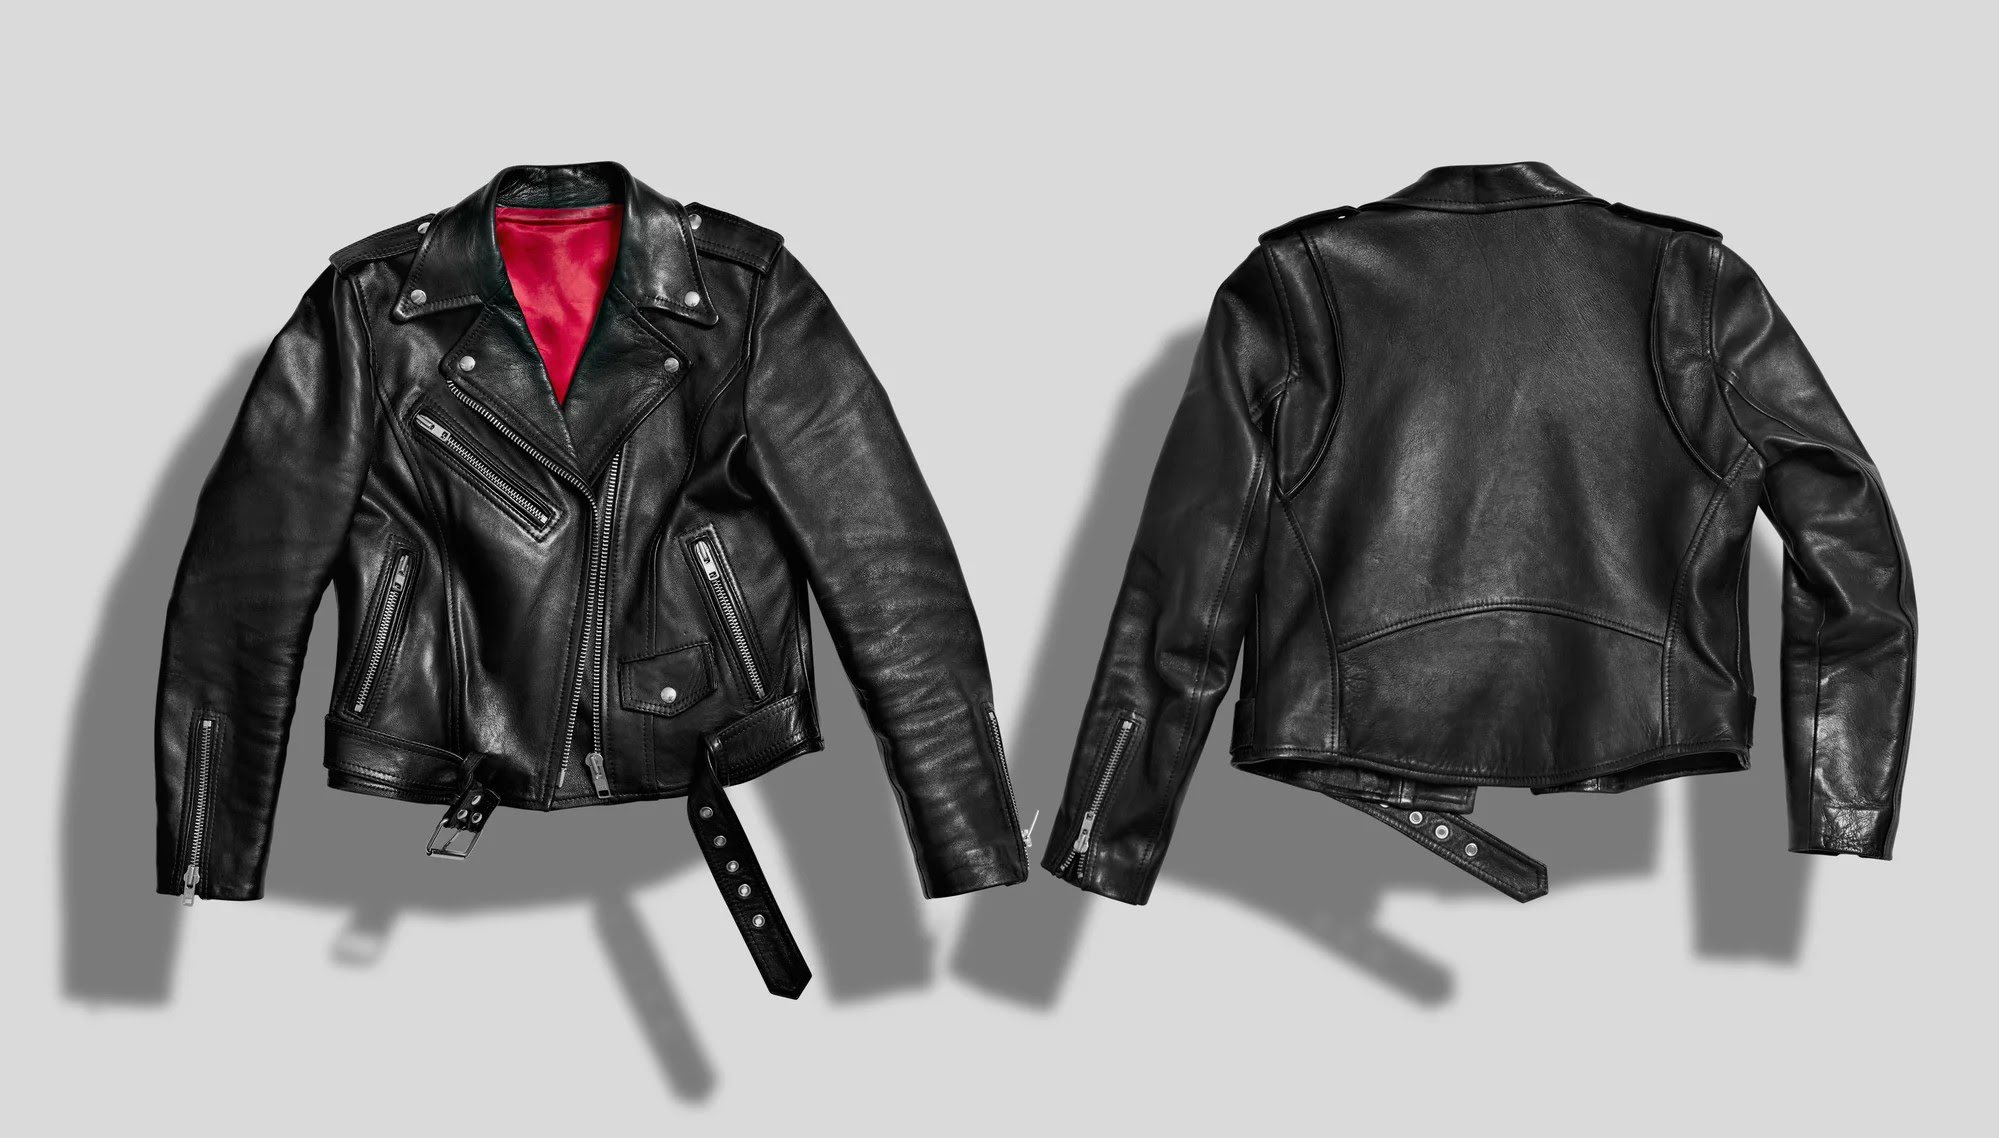 Review: Leather Motorcycle Jacket – A Stylish and Durable Choice